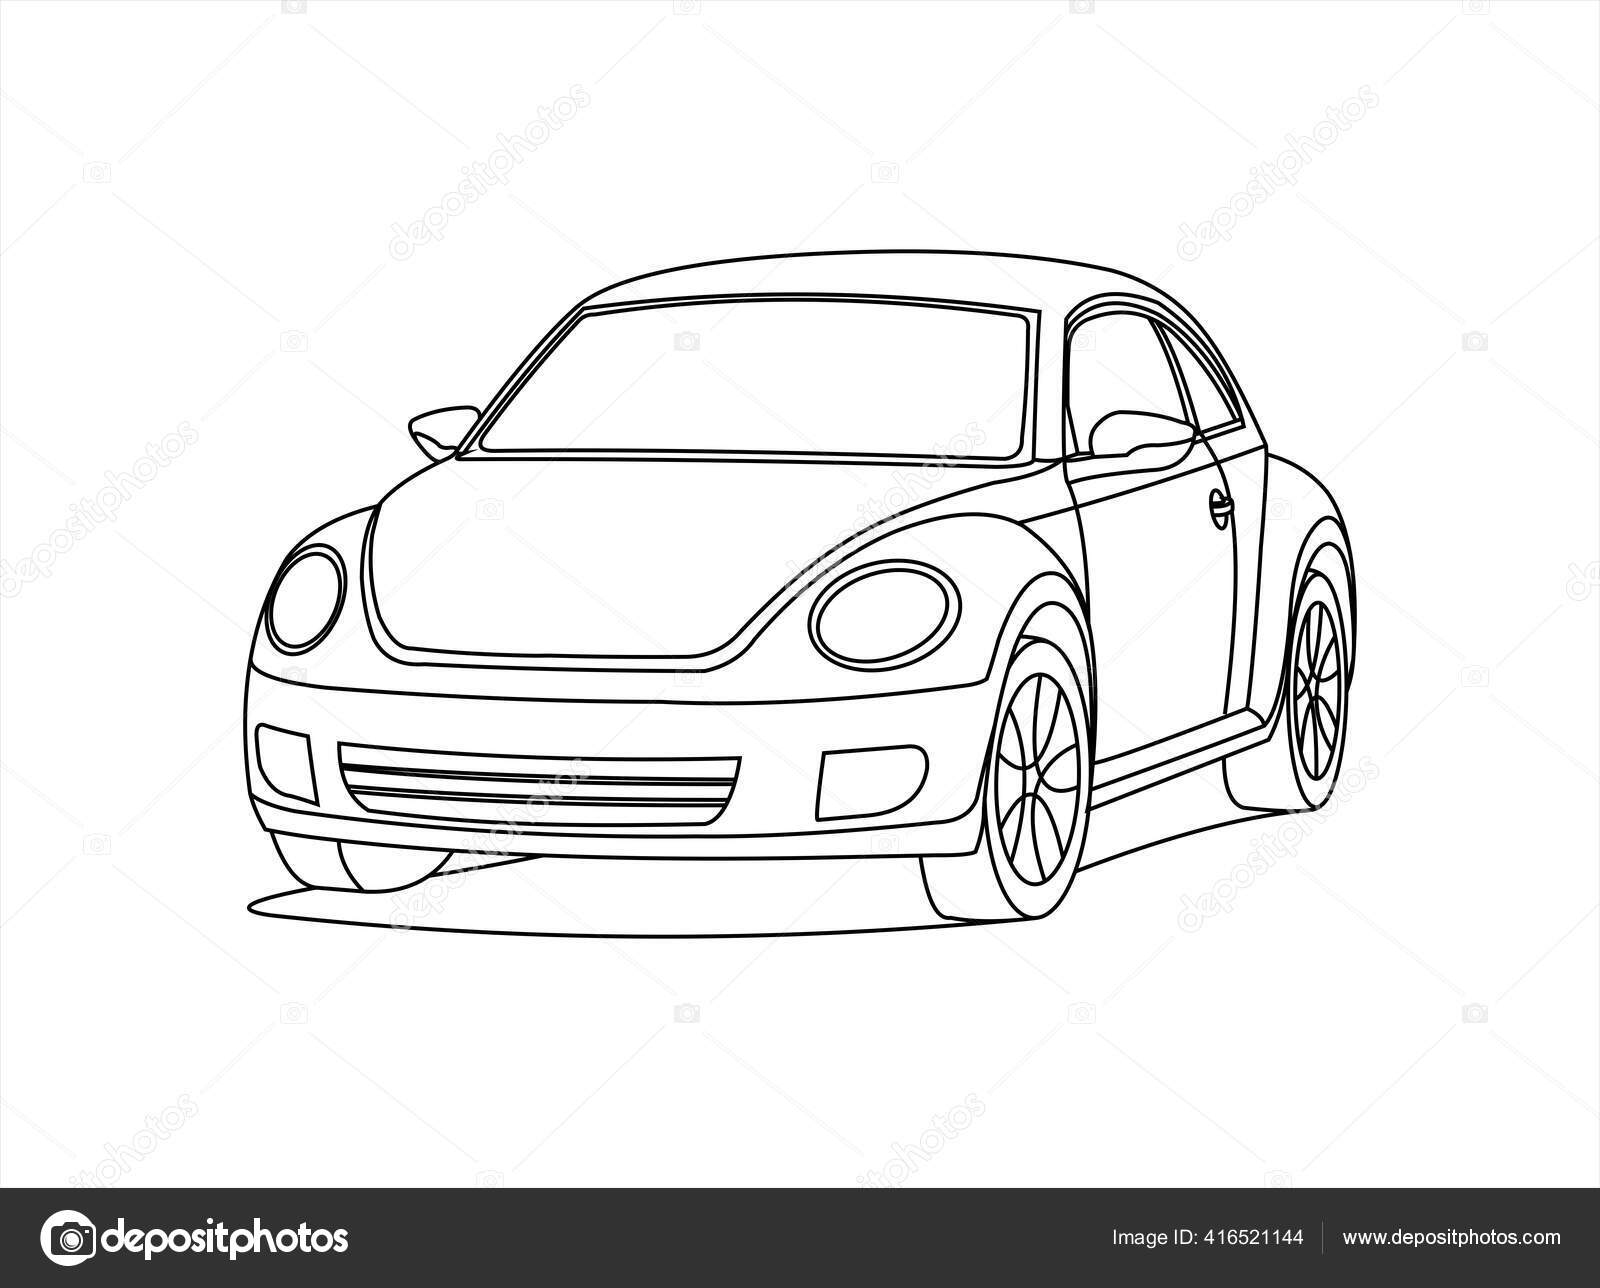 Details more than 175 front car drawing best